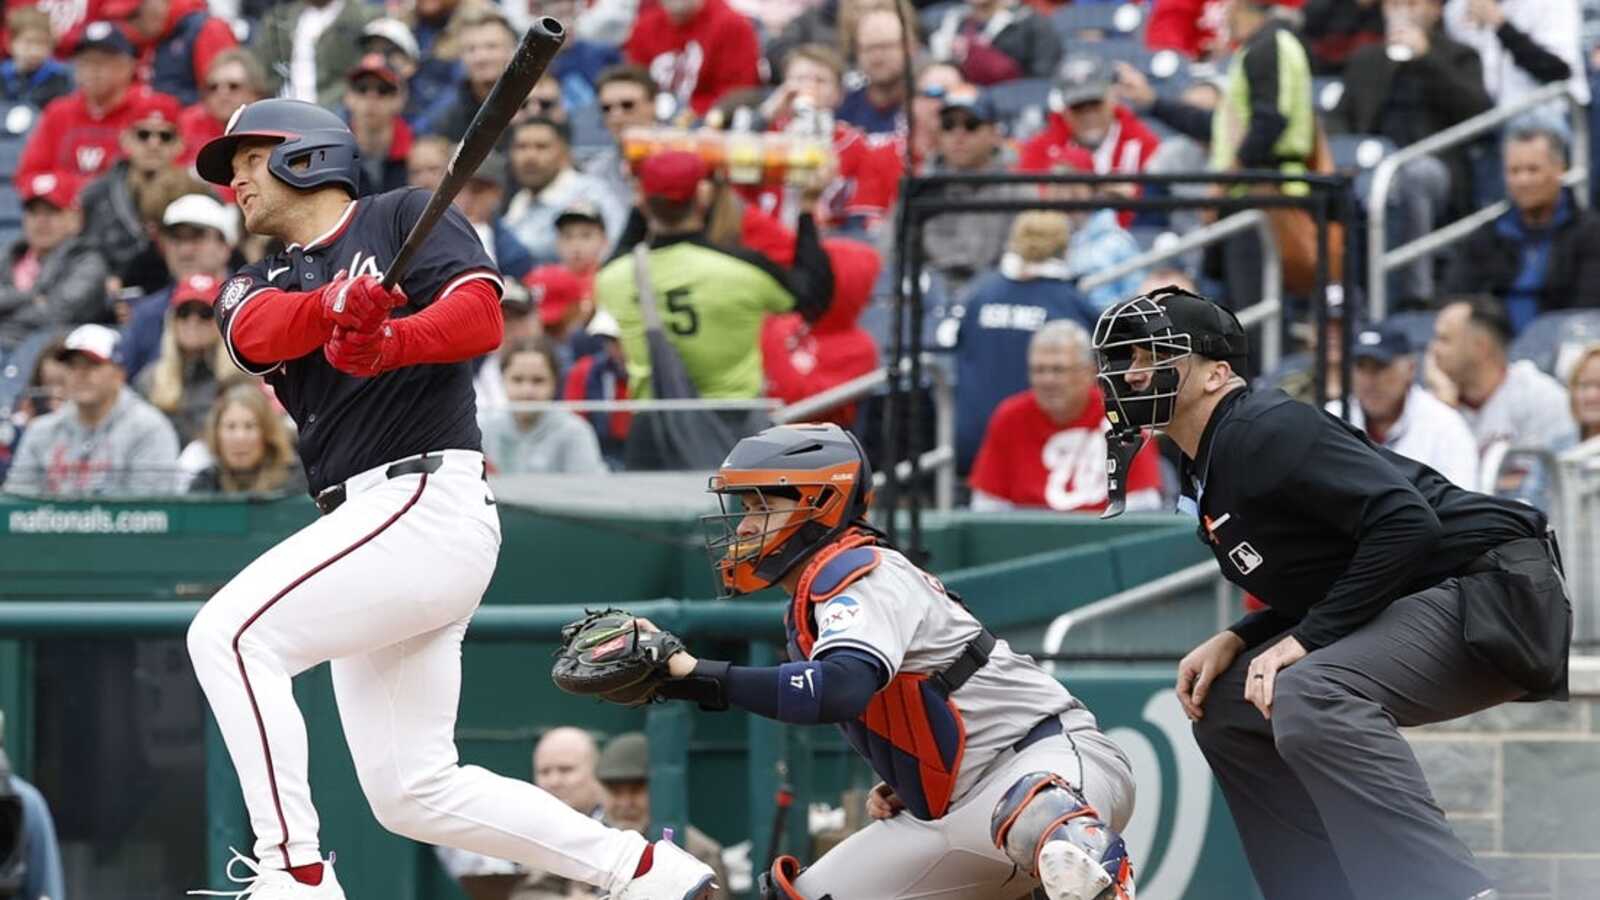 Nationals aim to continue winning trend, host Dodgers